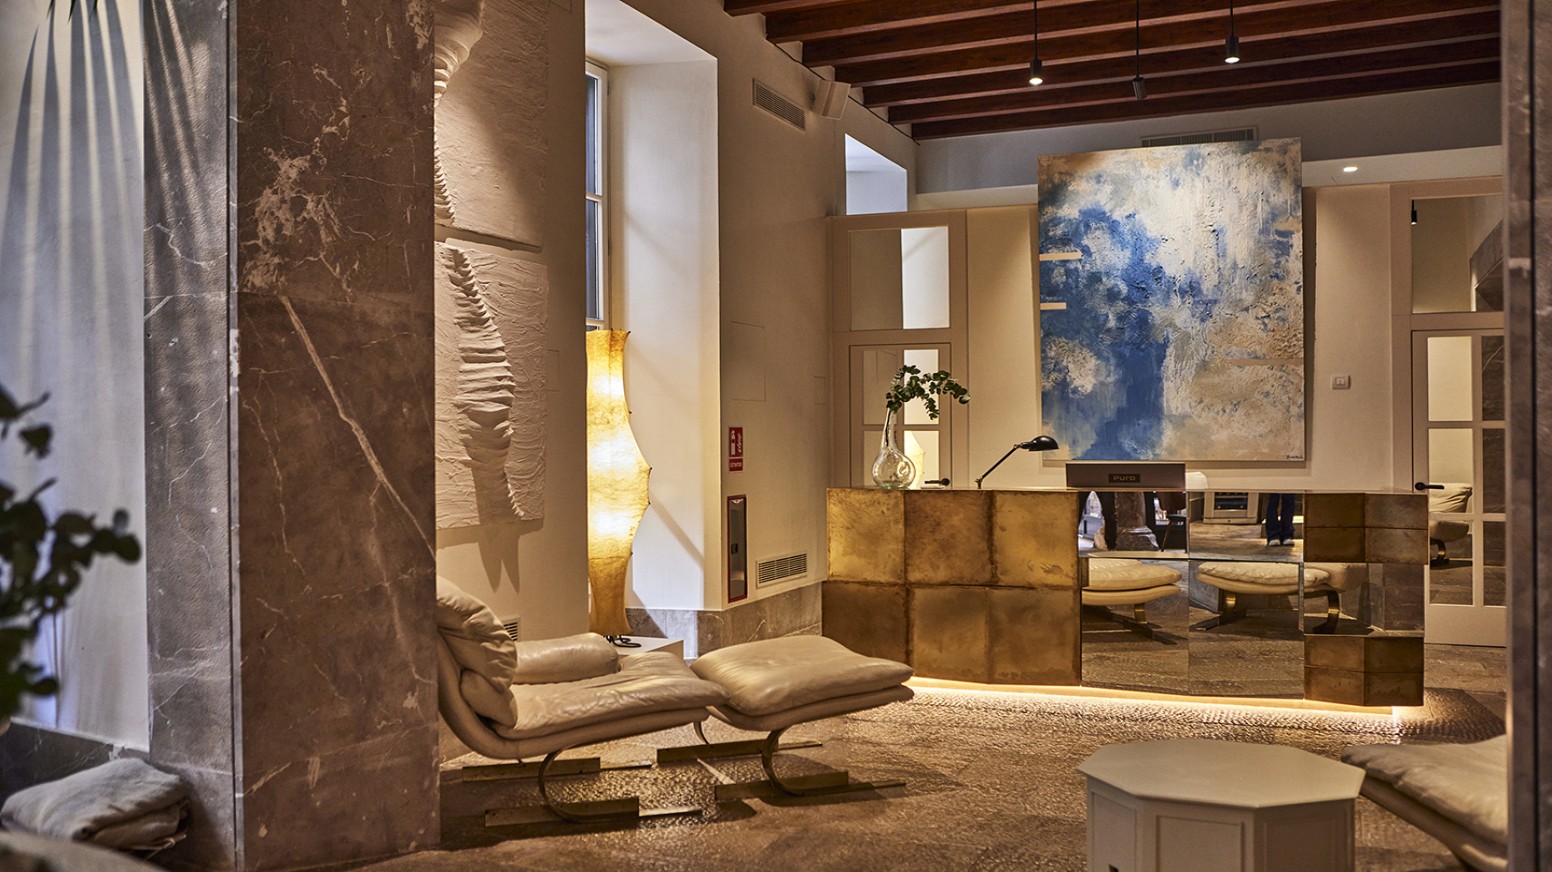 Art and luxury together hotels that offer experience